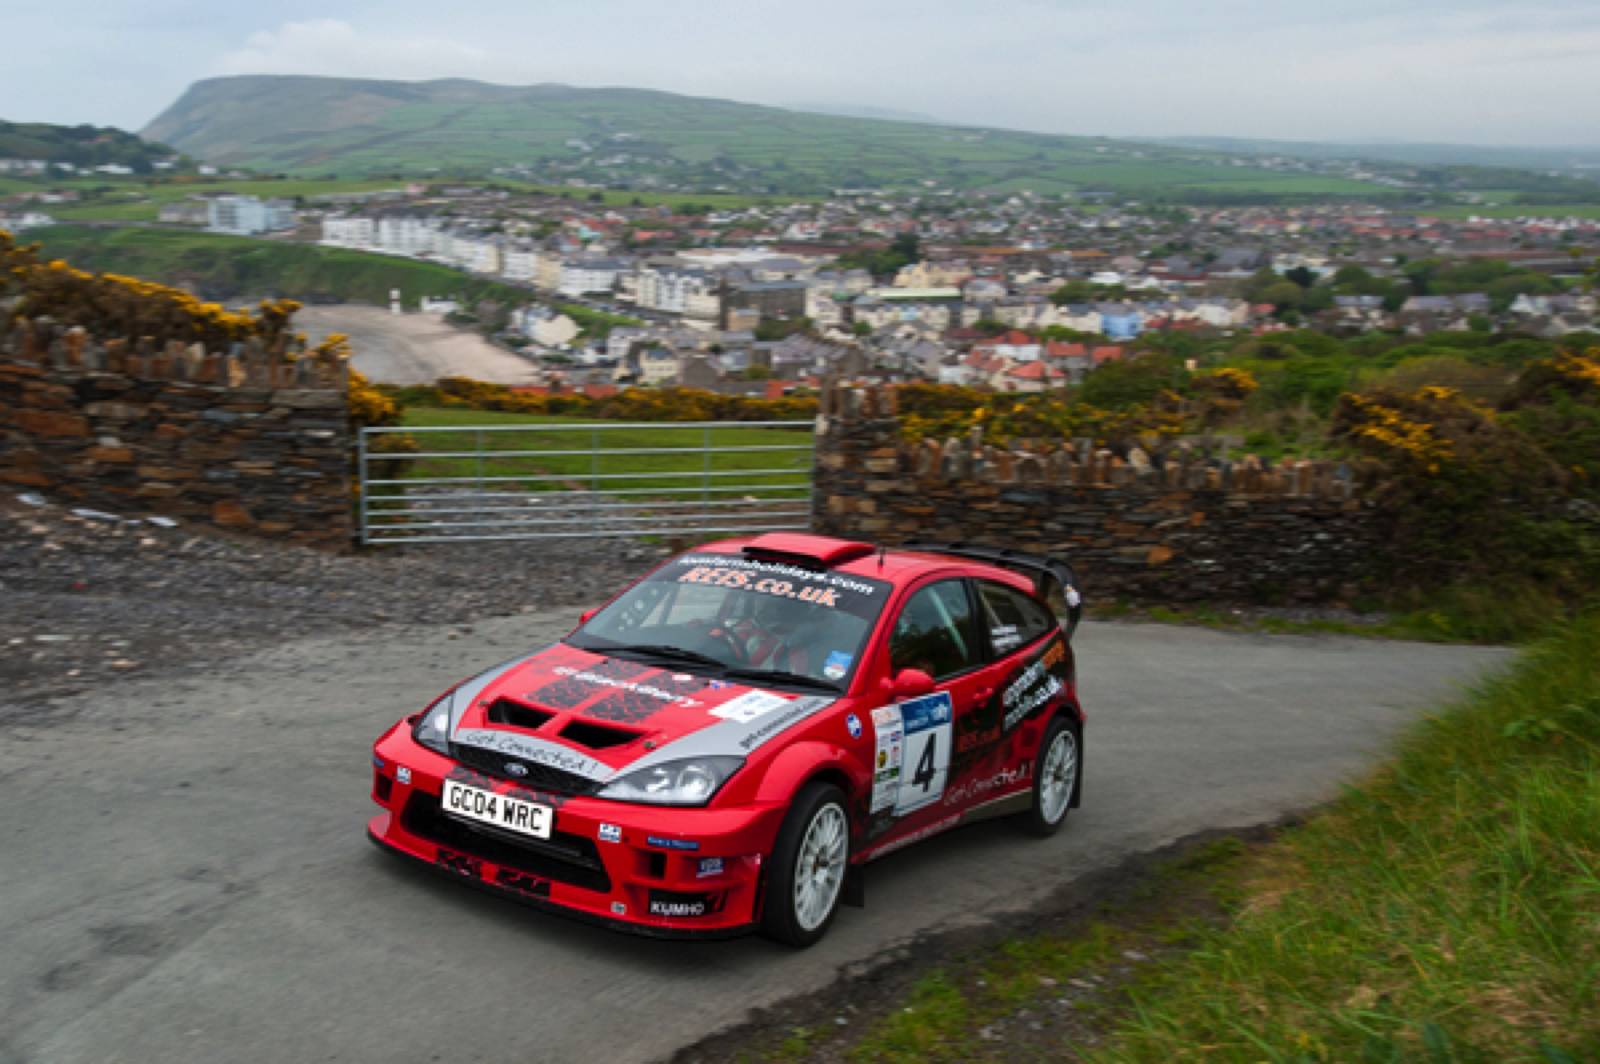 get-connected-rally-team-gallery-manx-rally-2011-00002